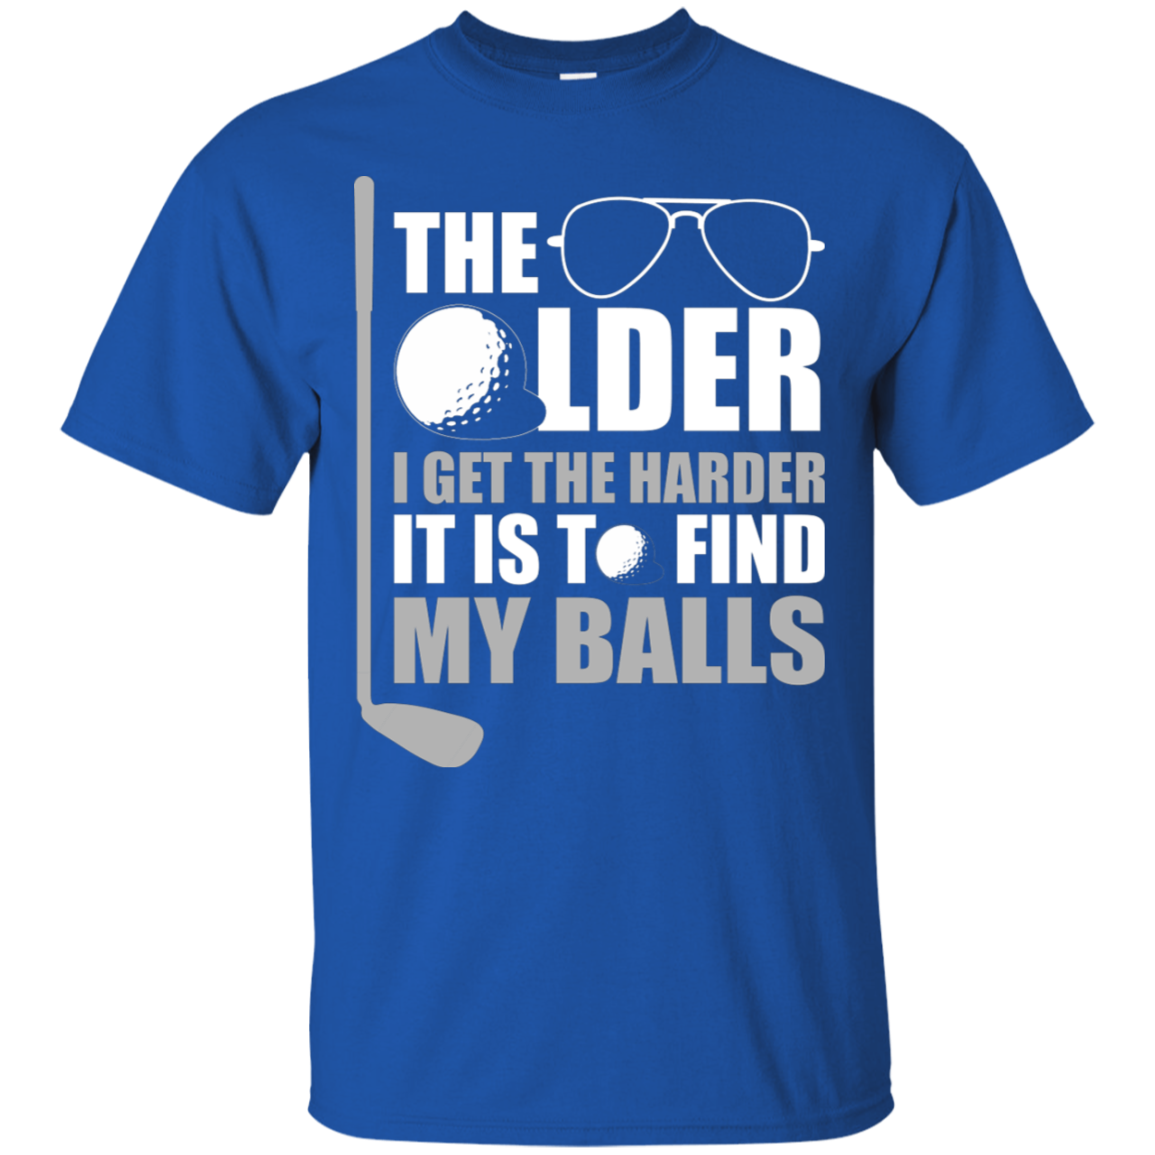 The Older I Get The Harder It Is To Find My Golf Balls T-Shirt Apparel - The Beer Lodge